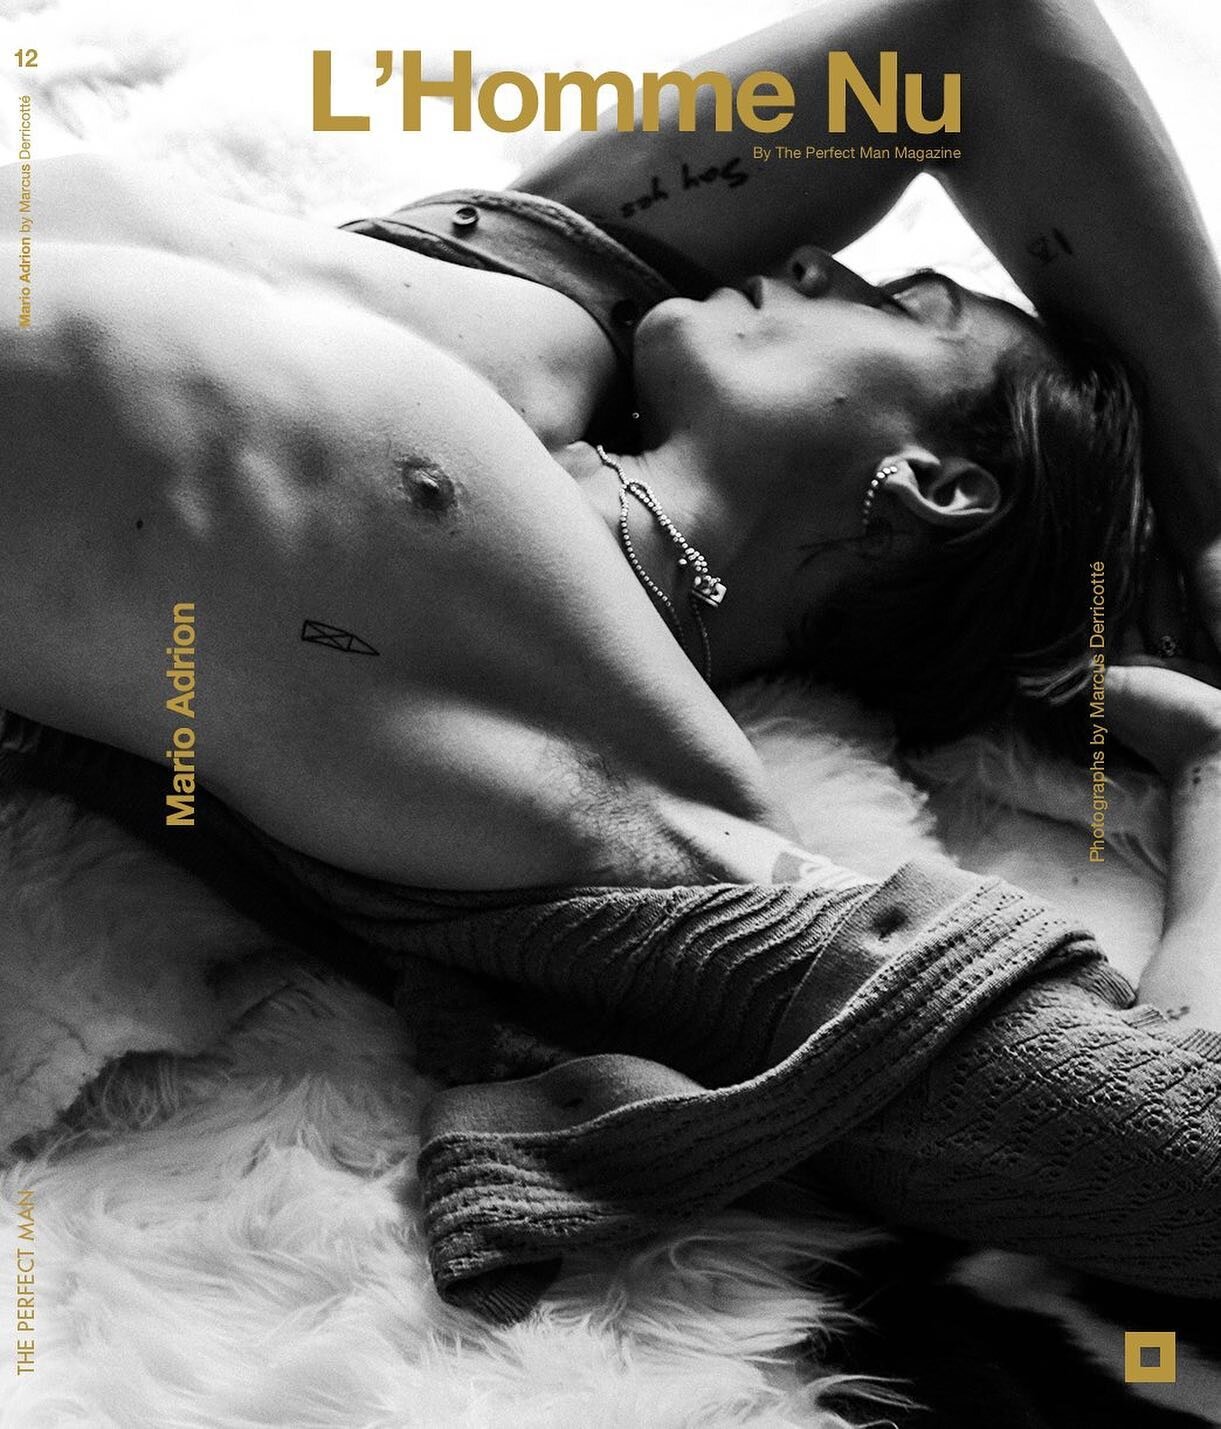 Truth or Dare: MARIO ADRION is a Agent Provocateur of sorts, not one to shy away from a dare or telling the truth for that matter. In this L&rsquo;Homme Nu exclusive this unique man strikes a sensual pose&mdash;and then some. 
&mdash;
To view the pho